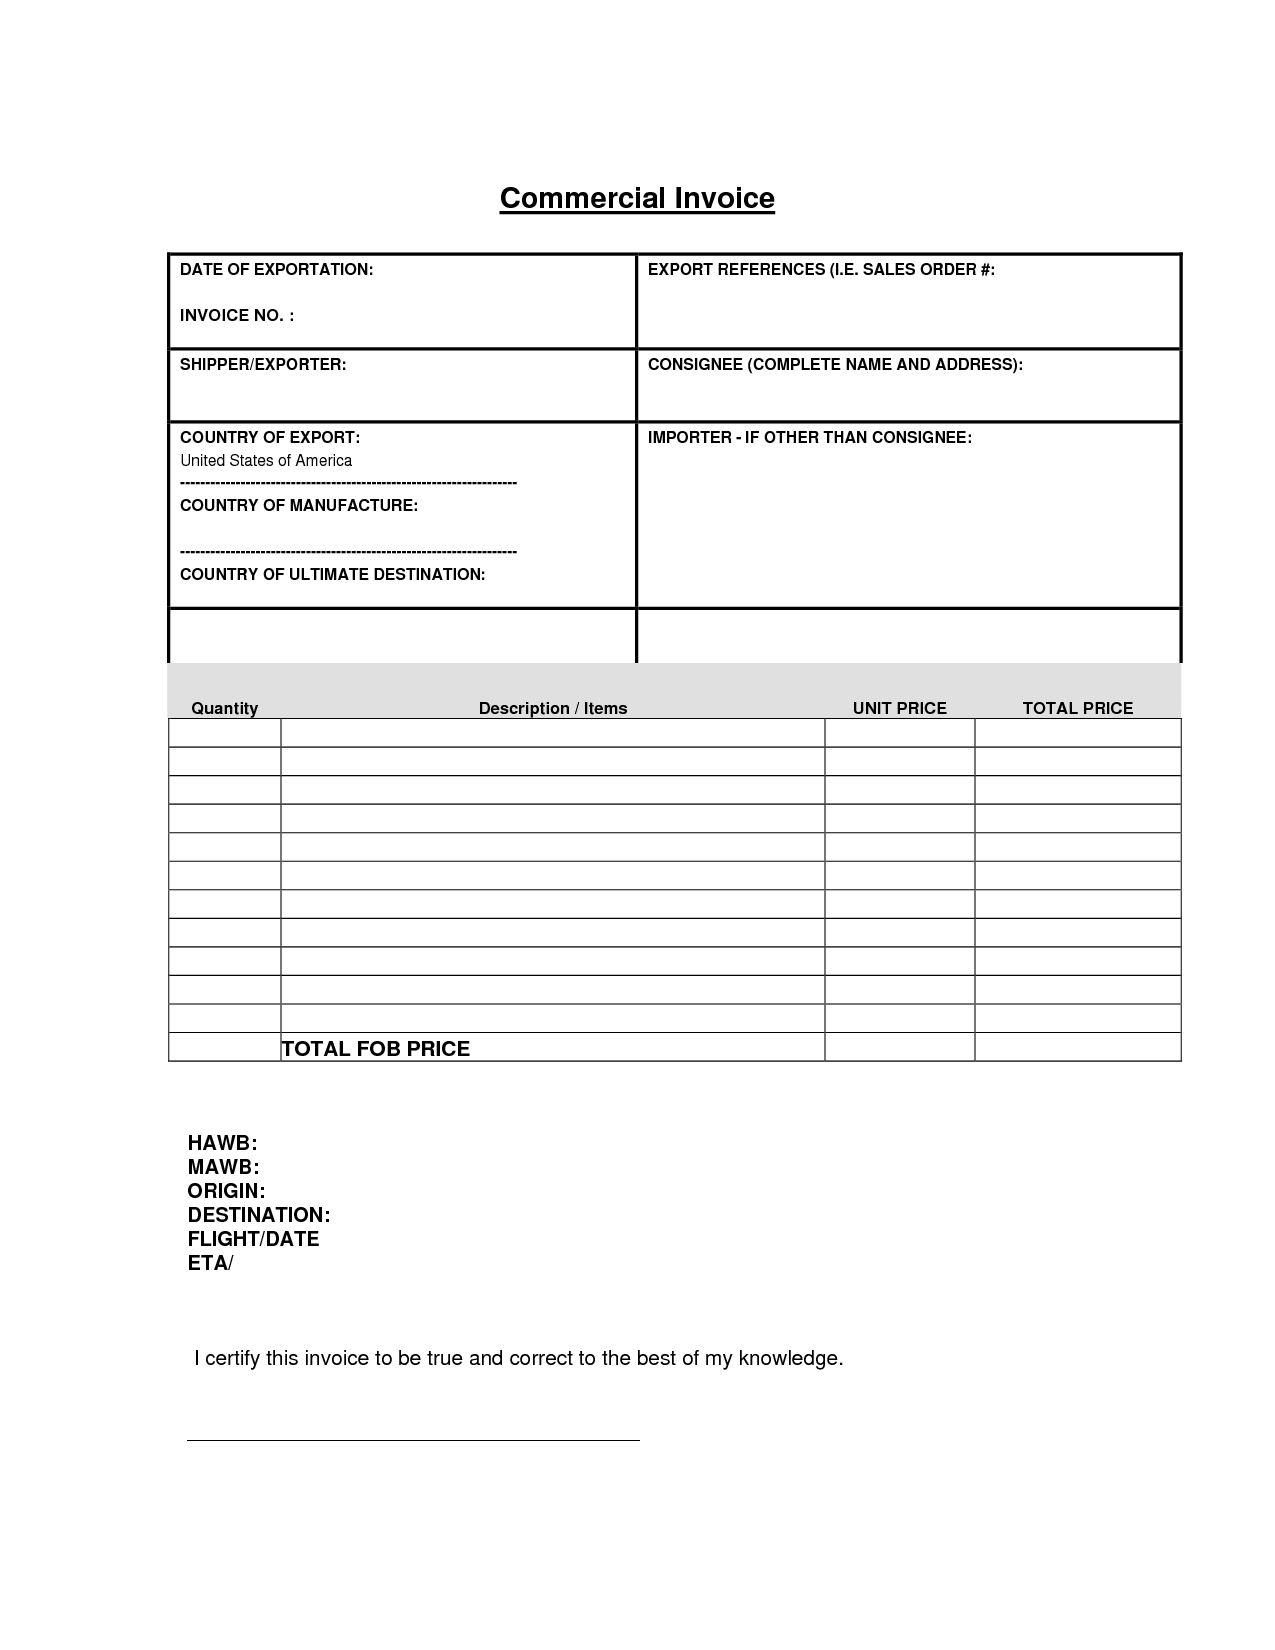 Best ideas of pages invoice template spectacular free invoice printable